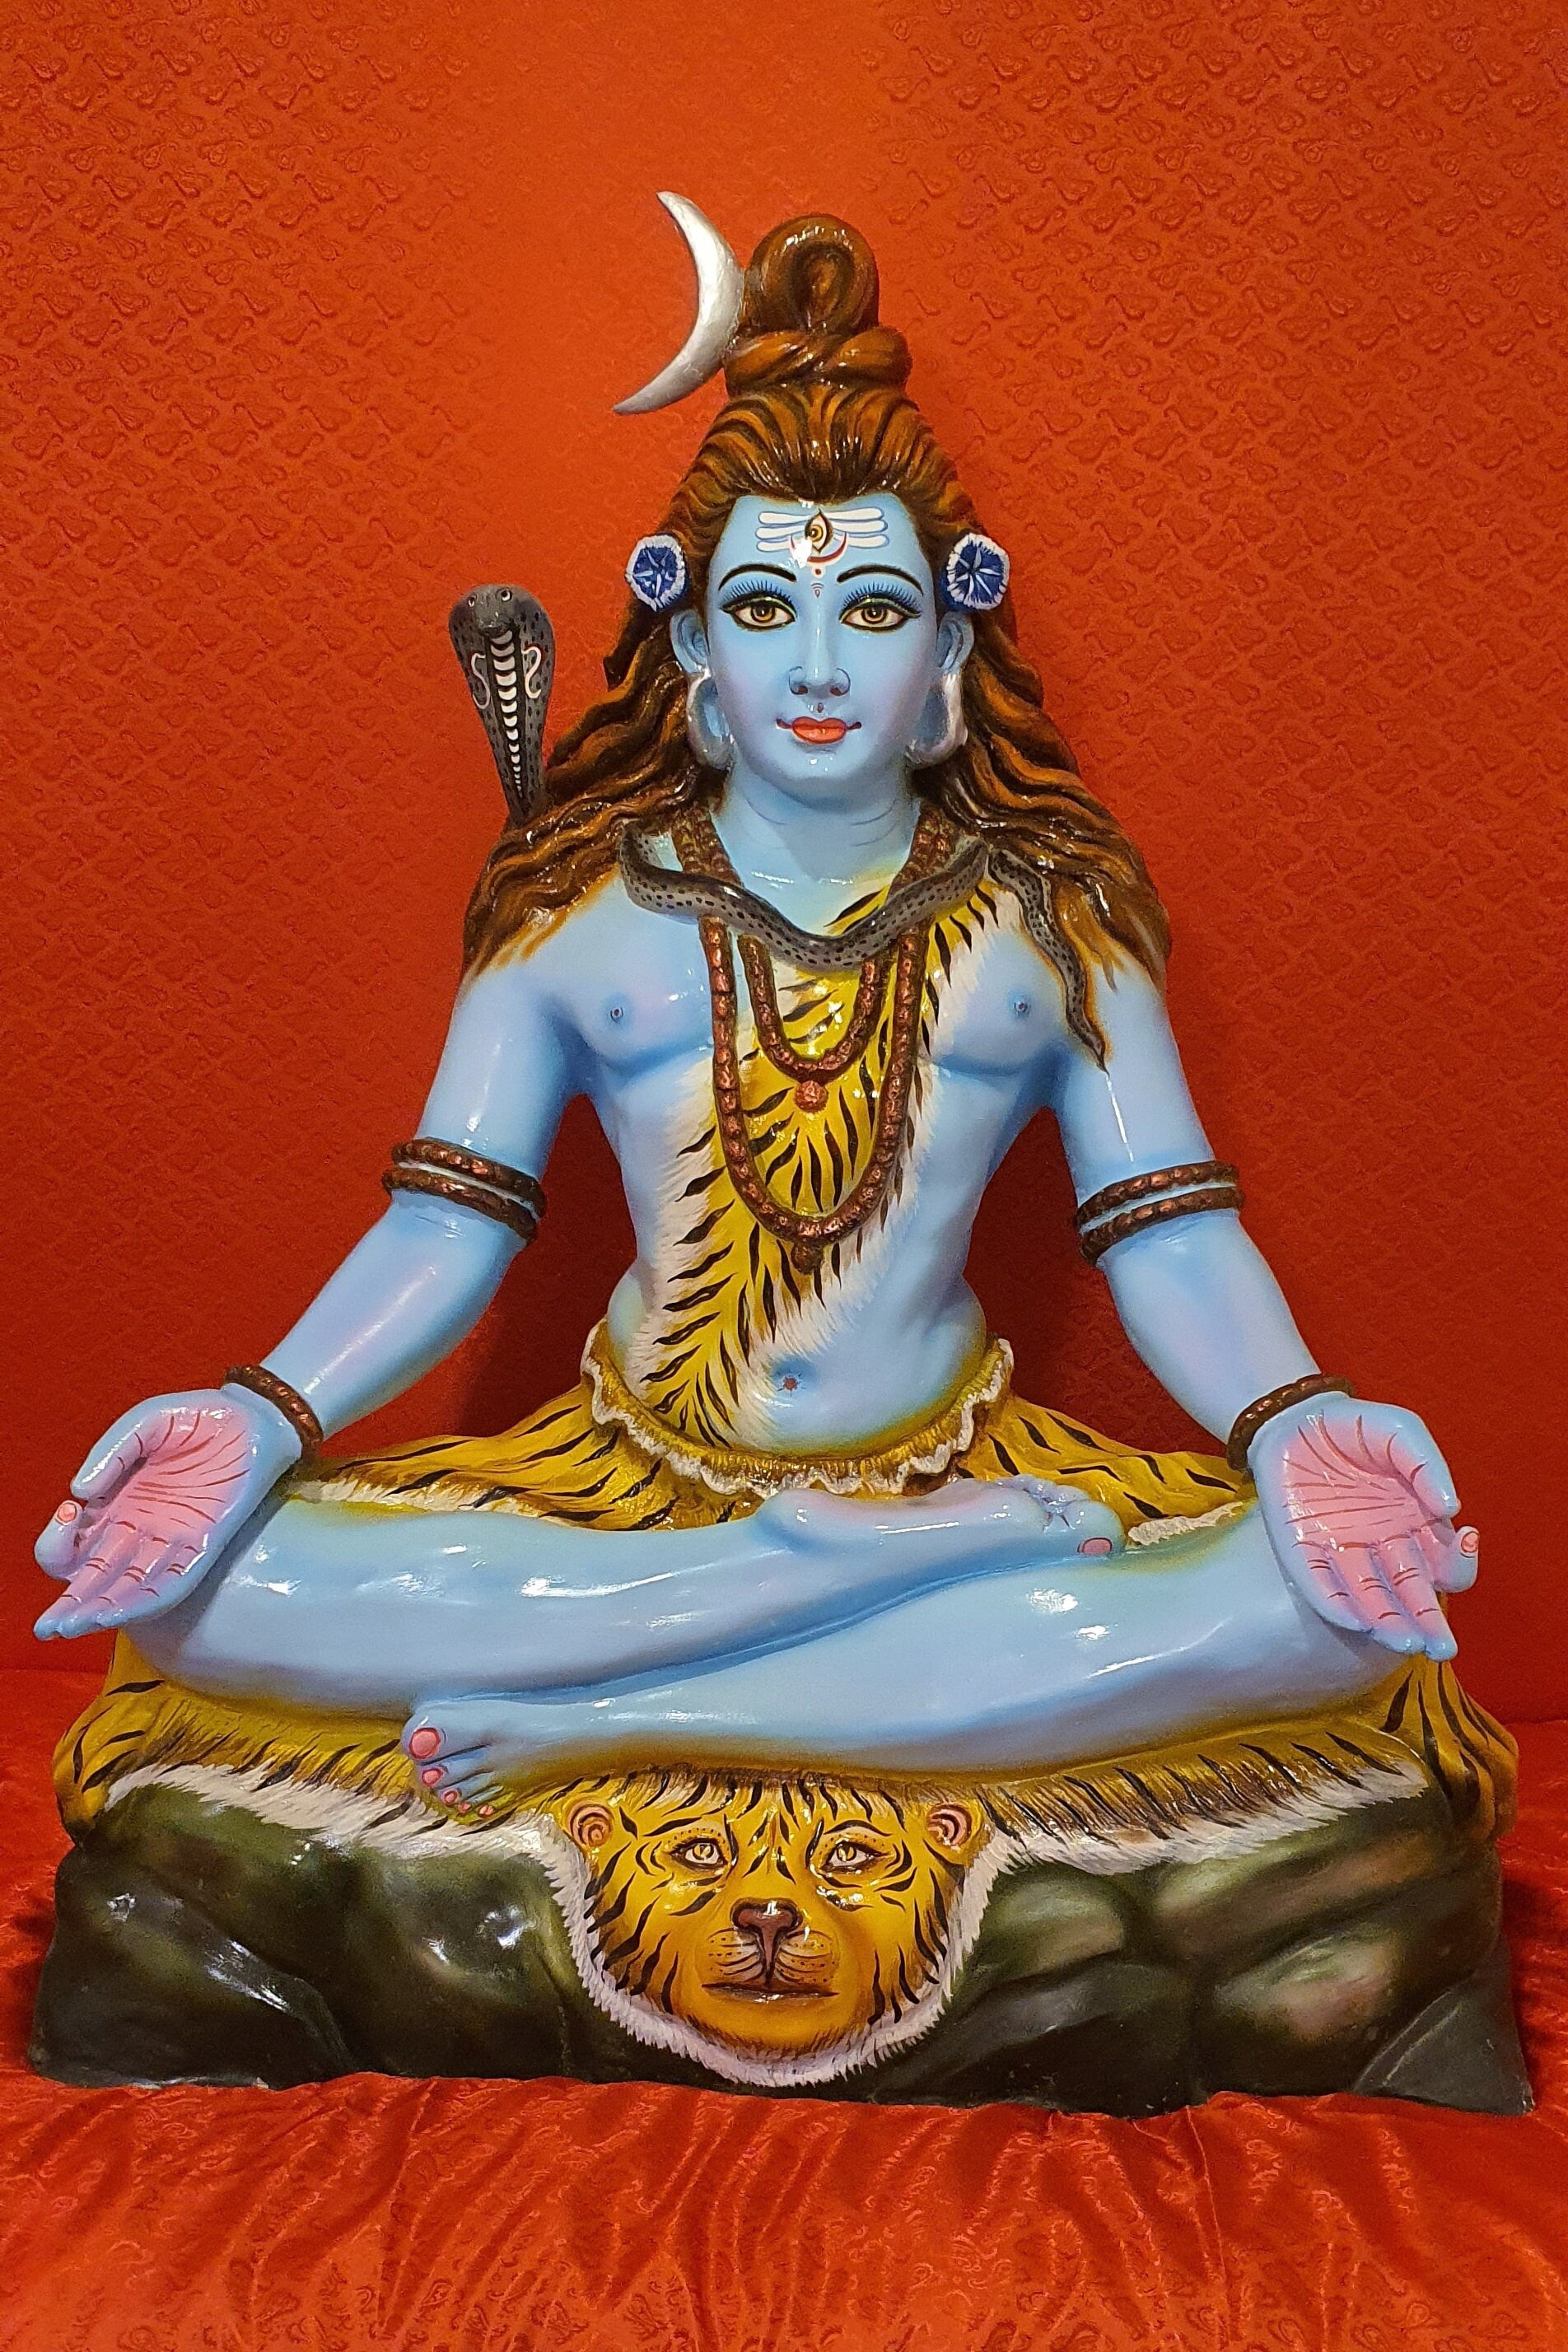 108 Wonderful Names Of Hindu Lord Shiva For Your Baby Boy